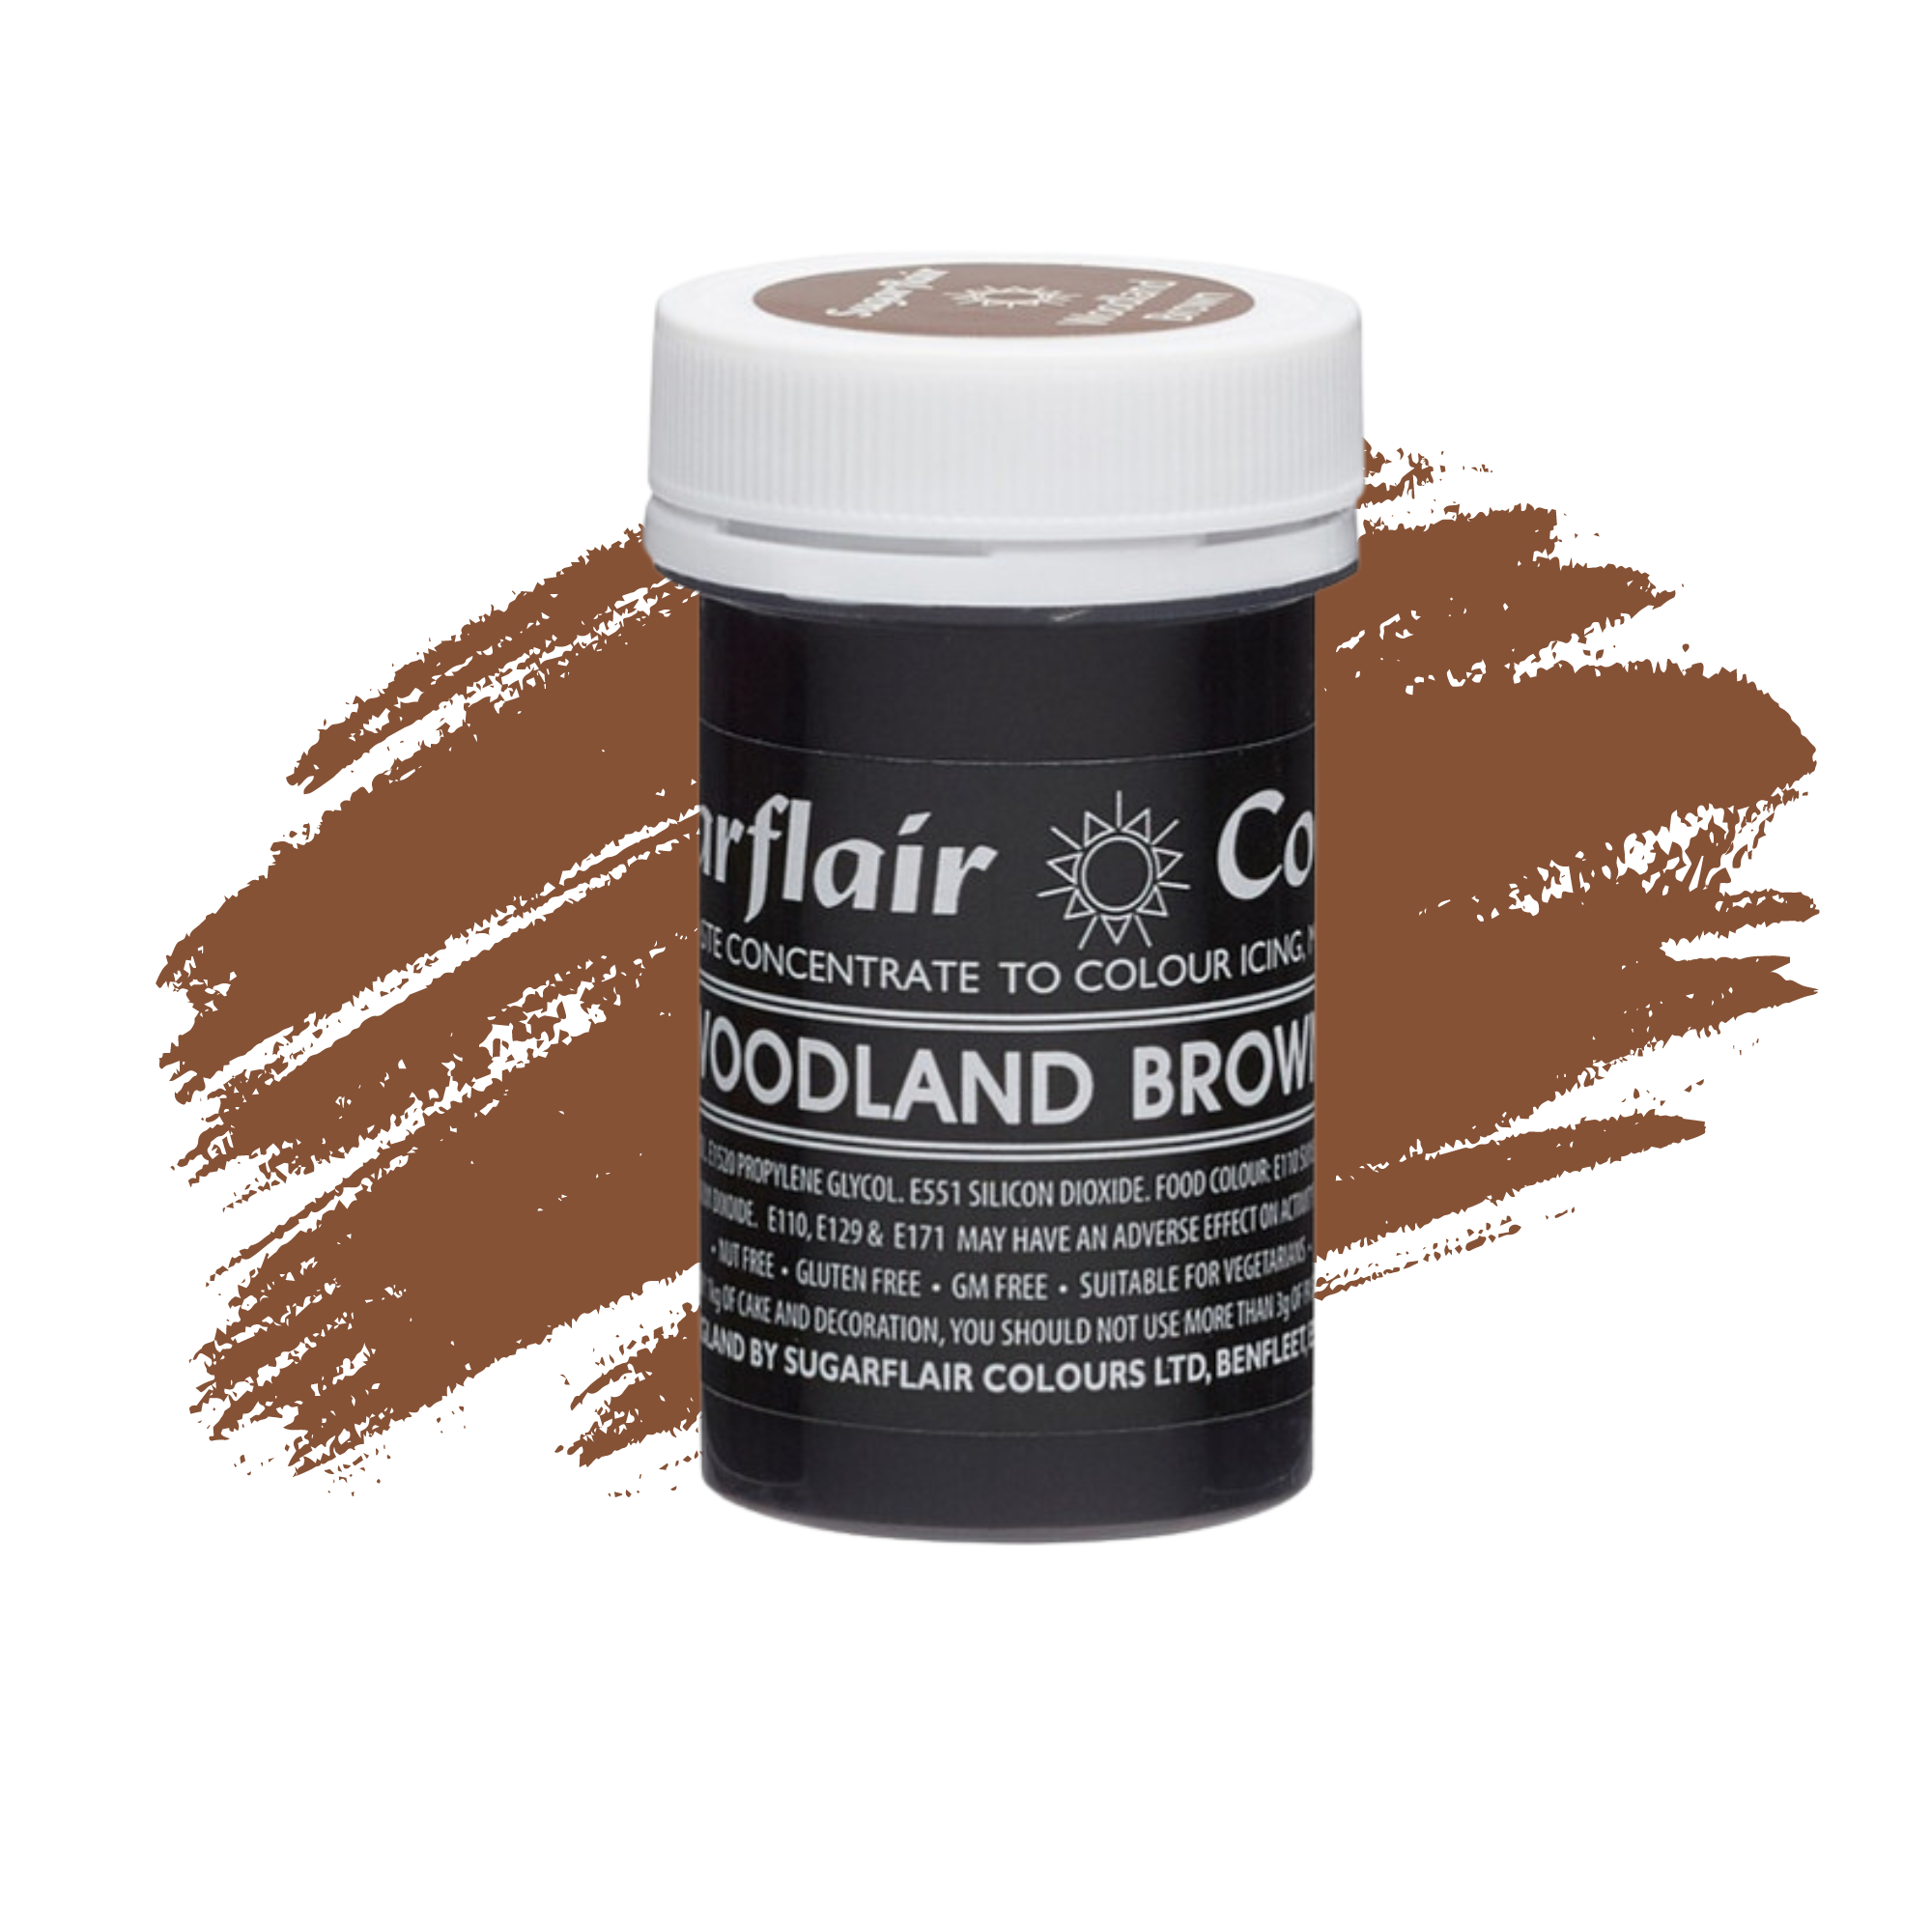 Sugarflair Paste Colours Concentrated Food Colouring - Pastel Woodland Brown - 25g